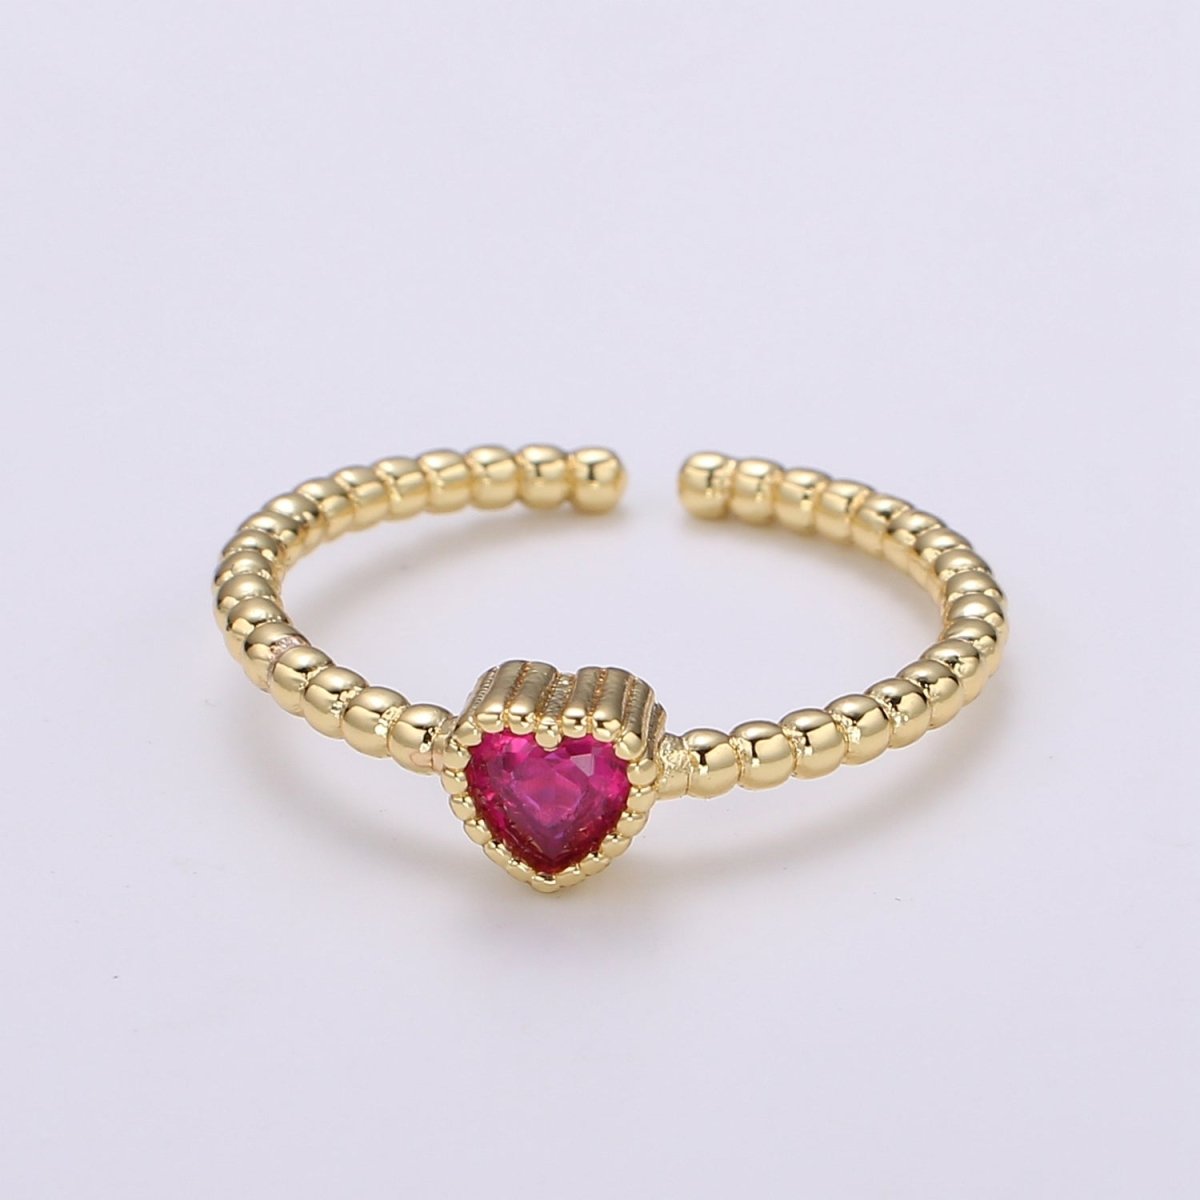 1pc 24K Gold Cubic Heart Ring, Pink Love CZ Pendant Charm, Beaded Design Band Ring For DIY Jewelry R319, R458 - DLUXCA